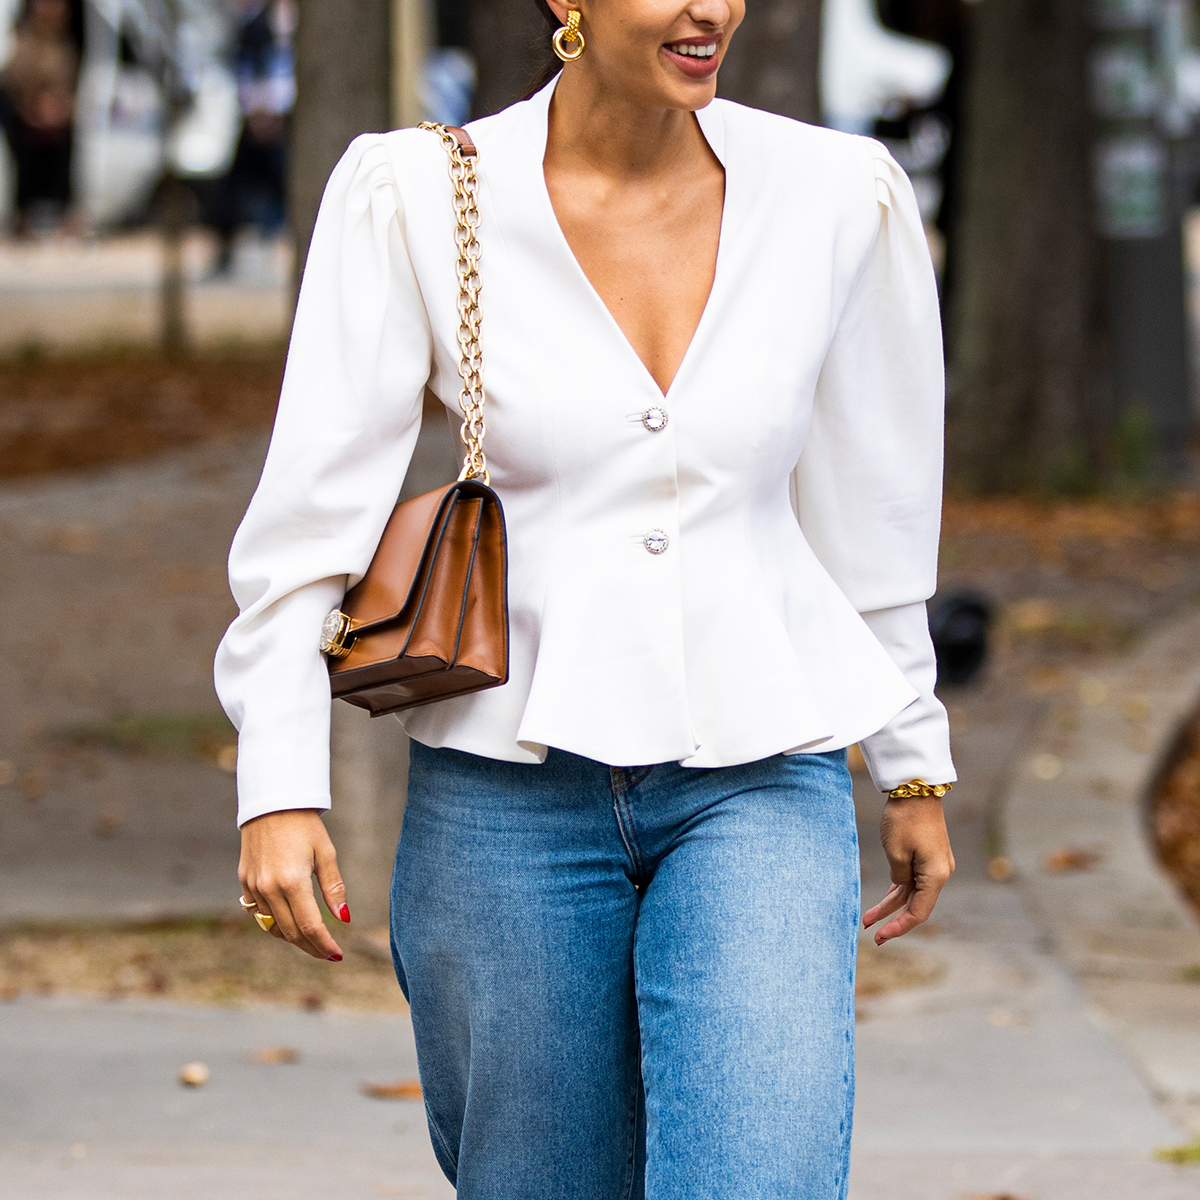 The Best Peplum Tops and to Wear Them | Who Wear